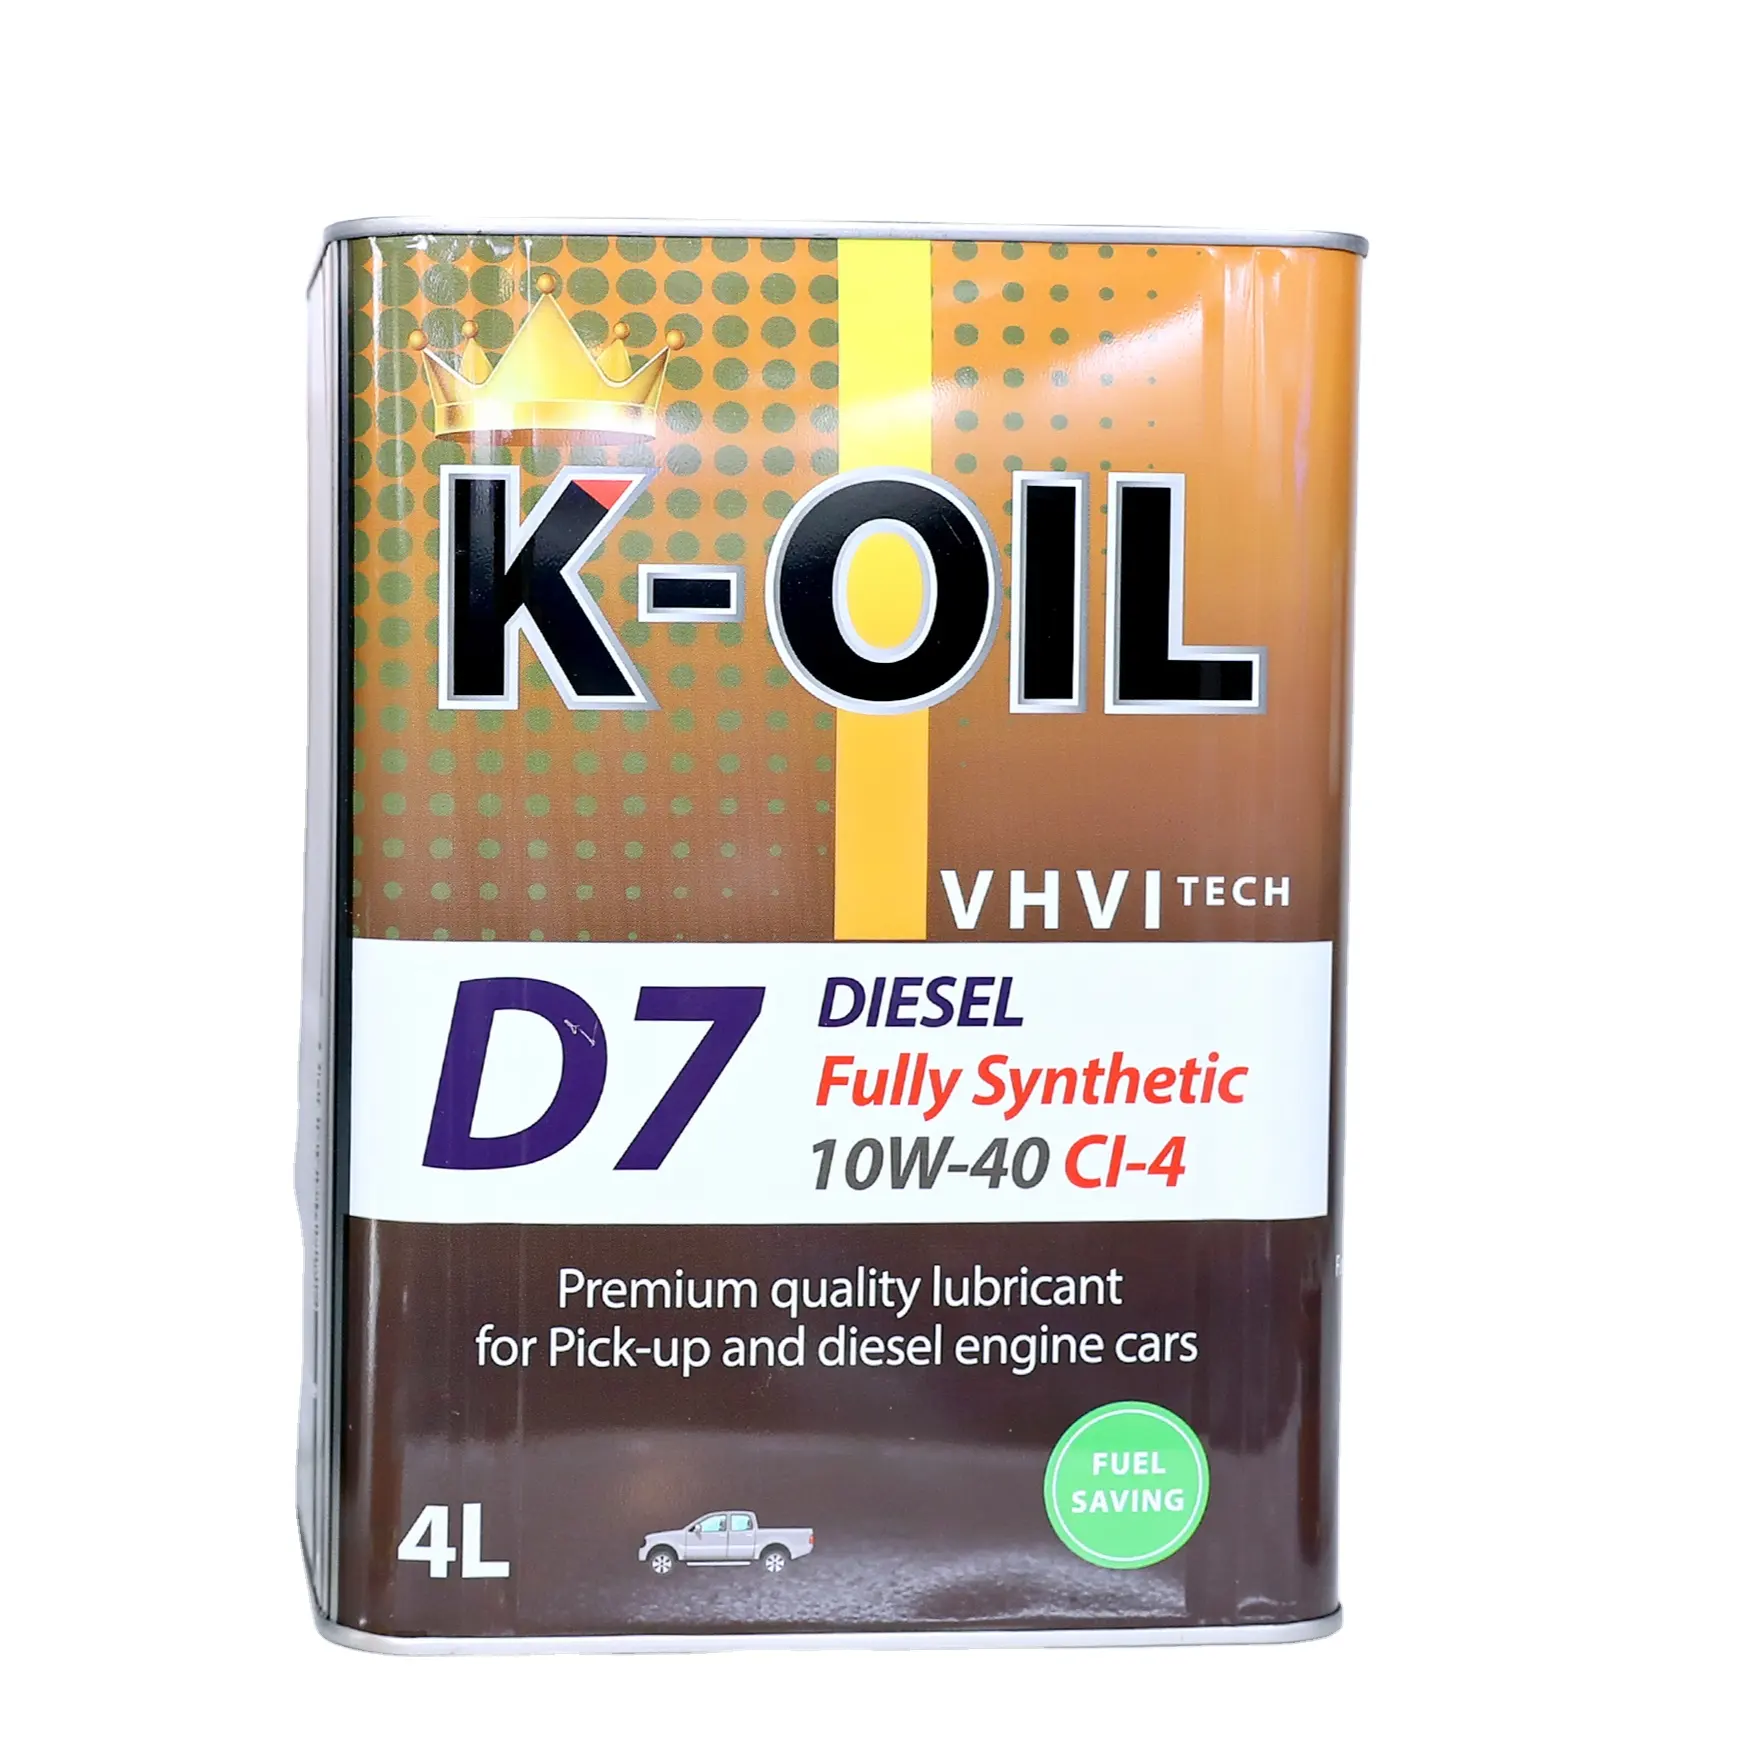 K-Oil D7 Diesel 10W40 CI-4 Fully Synthetic oil best quality and low price application for diesel engines made in Vietnam